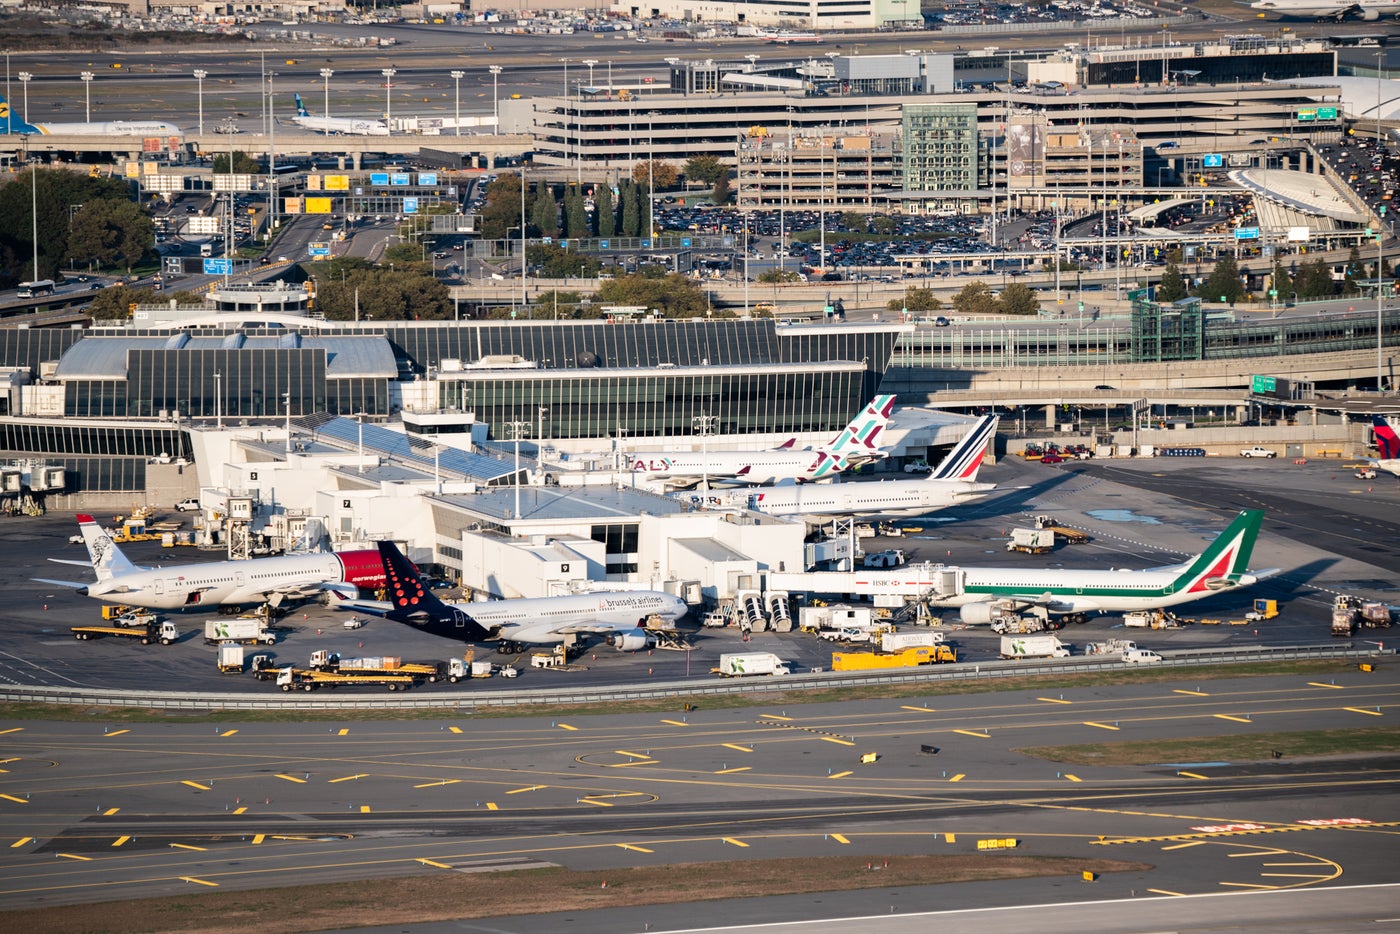 Details Emerge in JFK's Renovation, BA Moving to Terminal 8